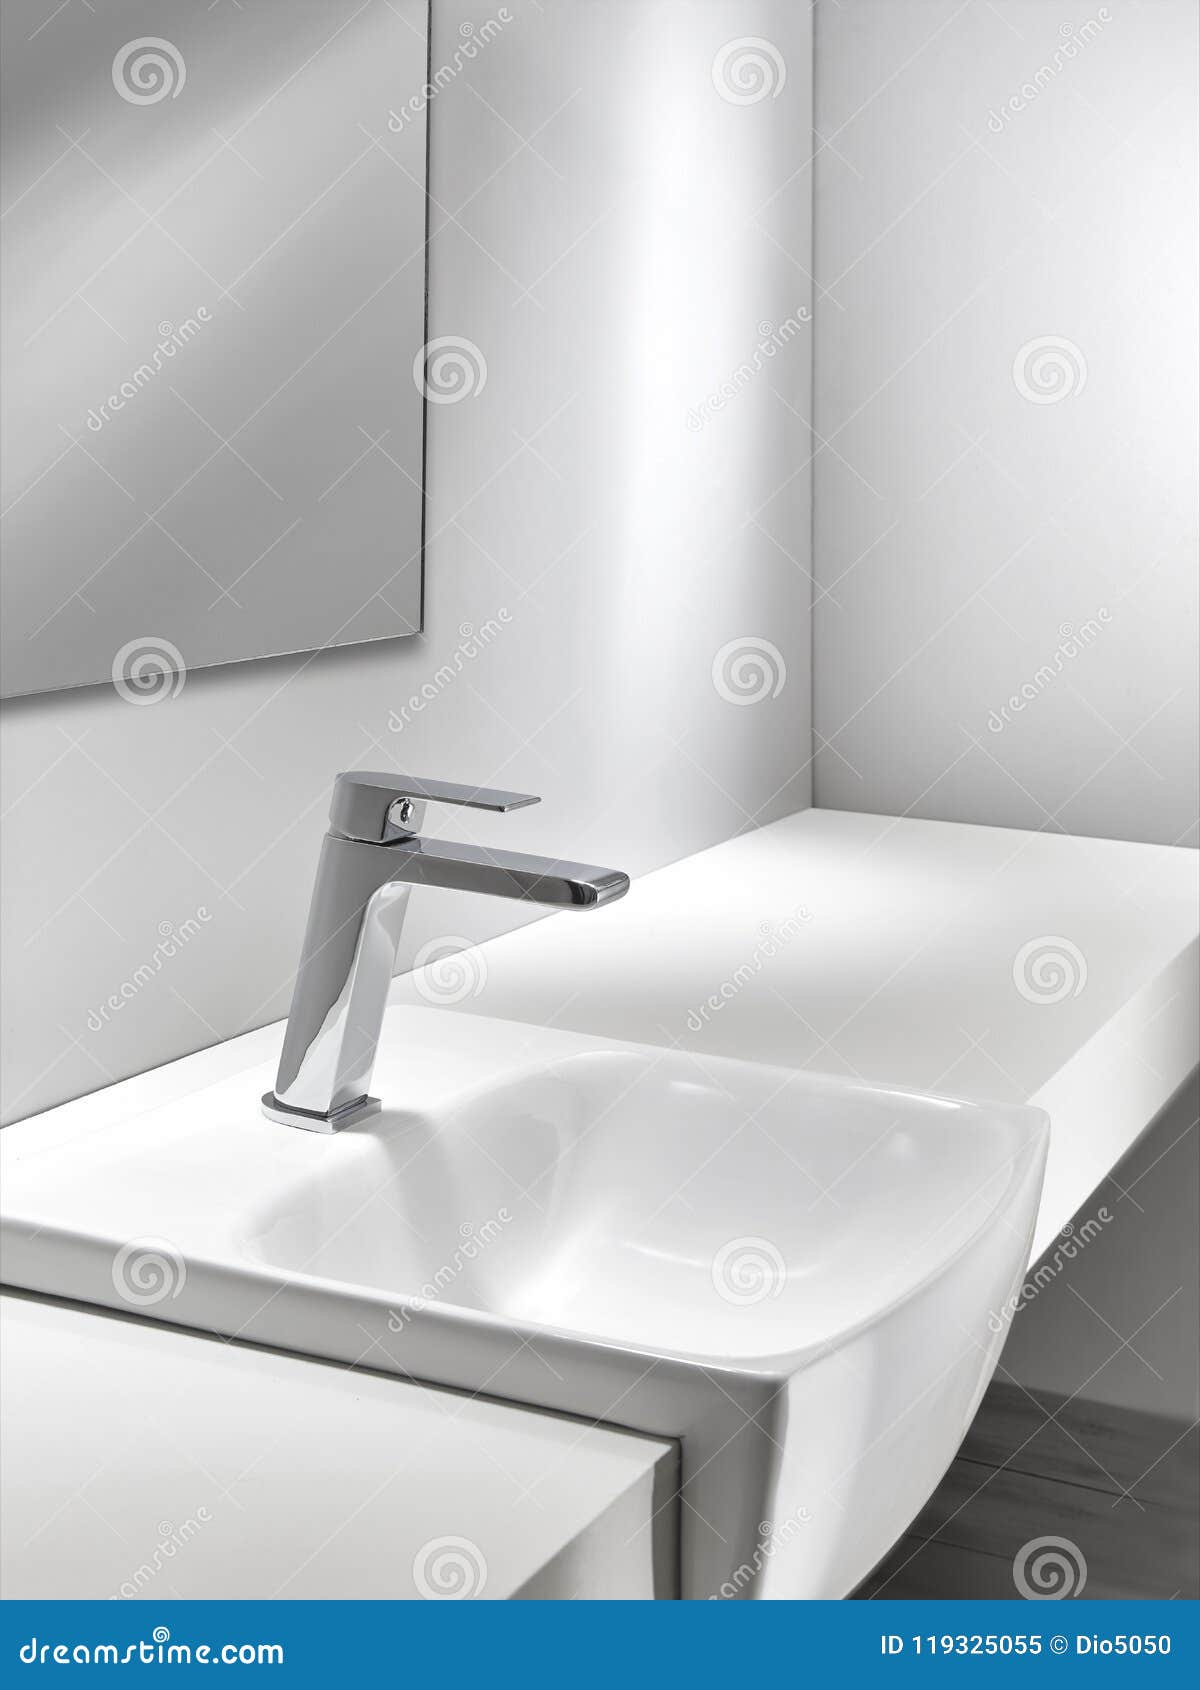 wash basin faucet in super clean environment